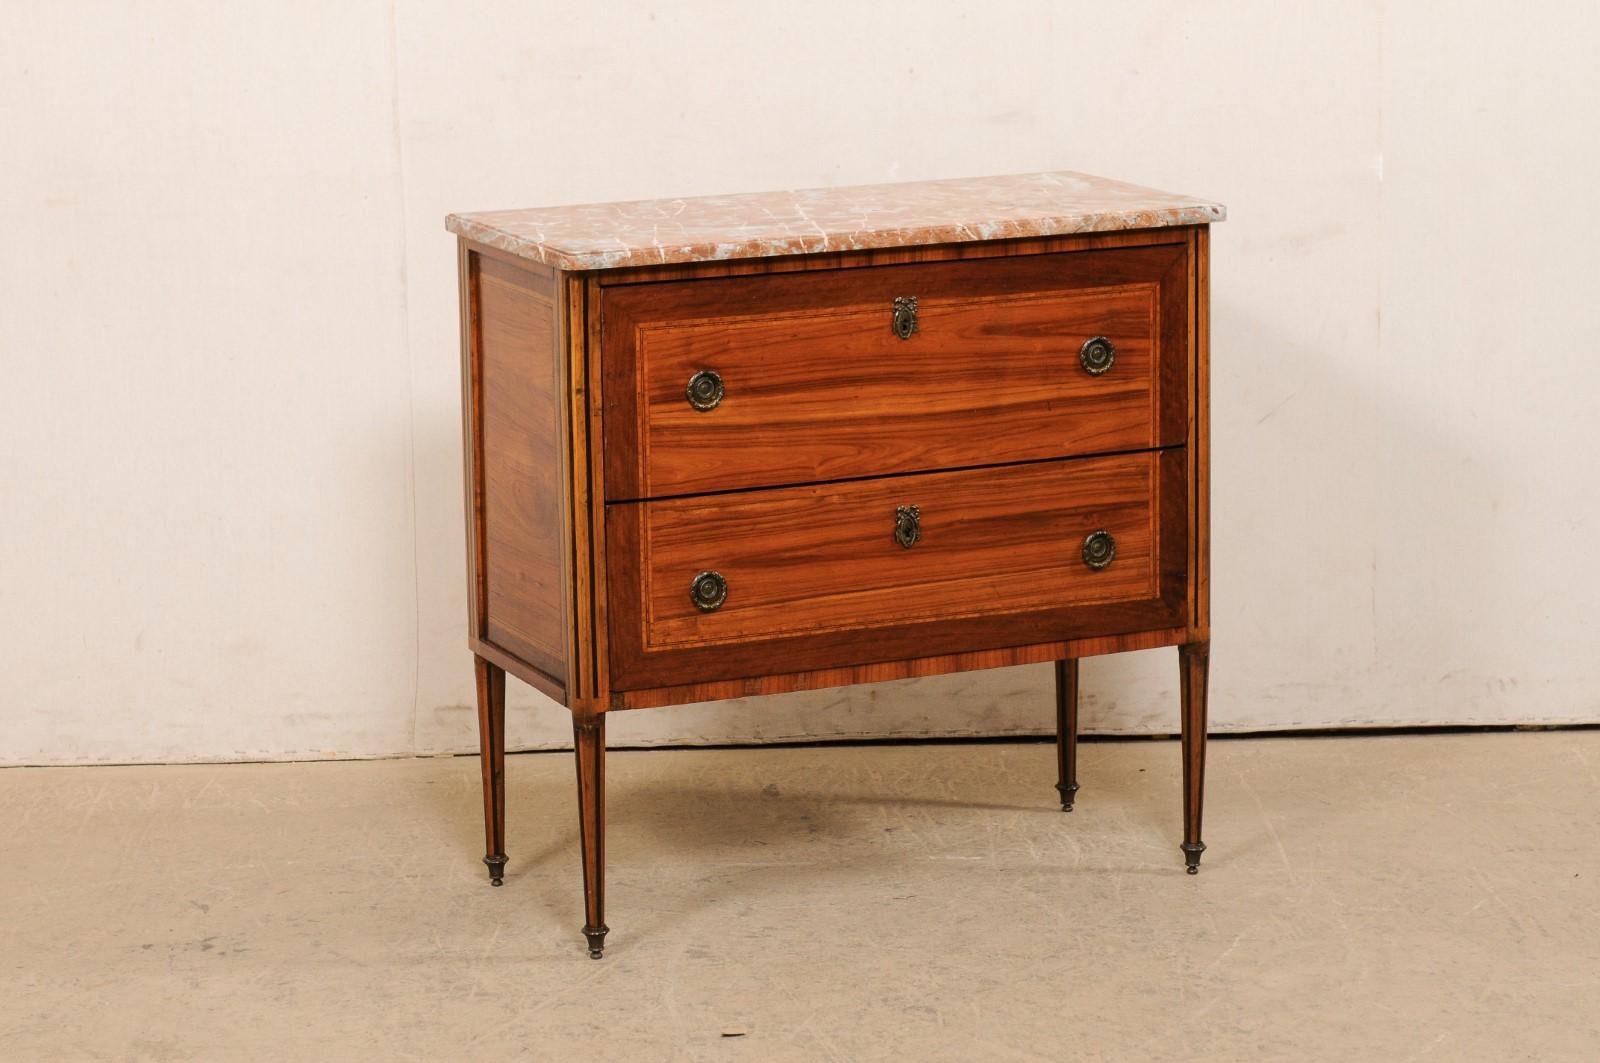 A French raised commode with marble top and inlays from the 19th century. This antique chest from France has a marble top with ogee-edging and rounded at front corners, atop a case which houses two deep-set, dove-tailed drawers, and raised upon